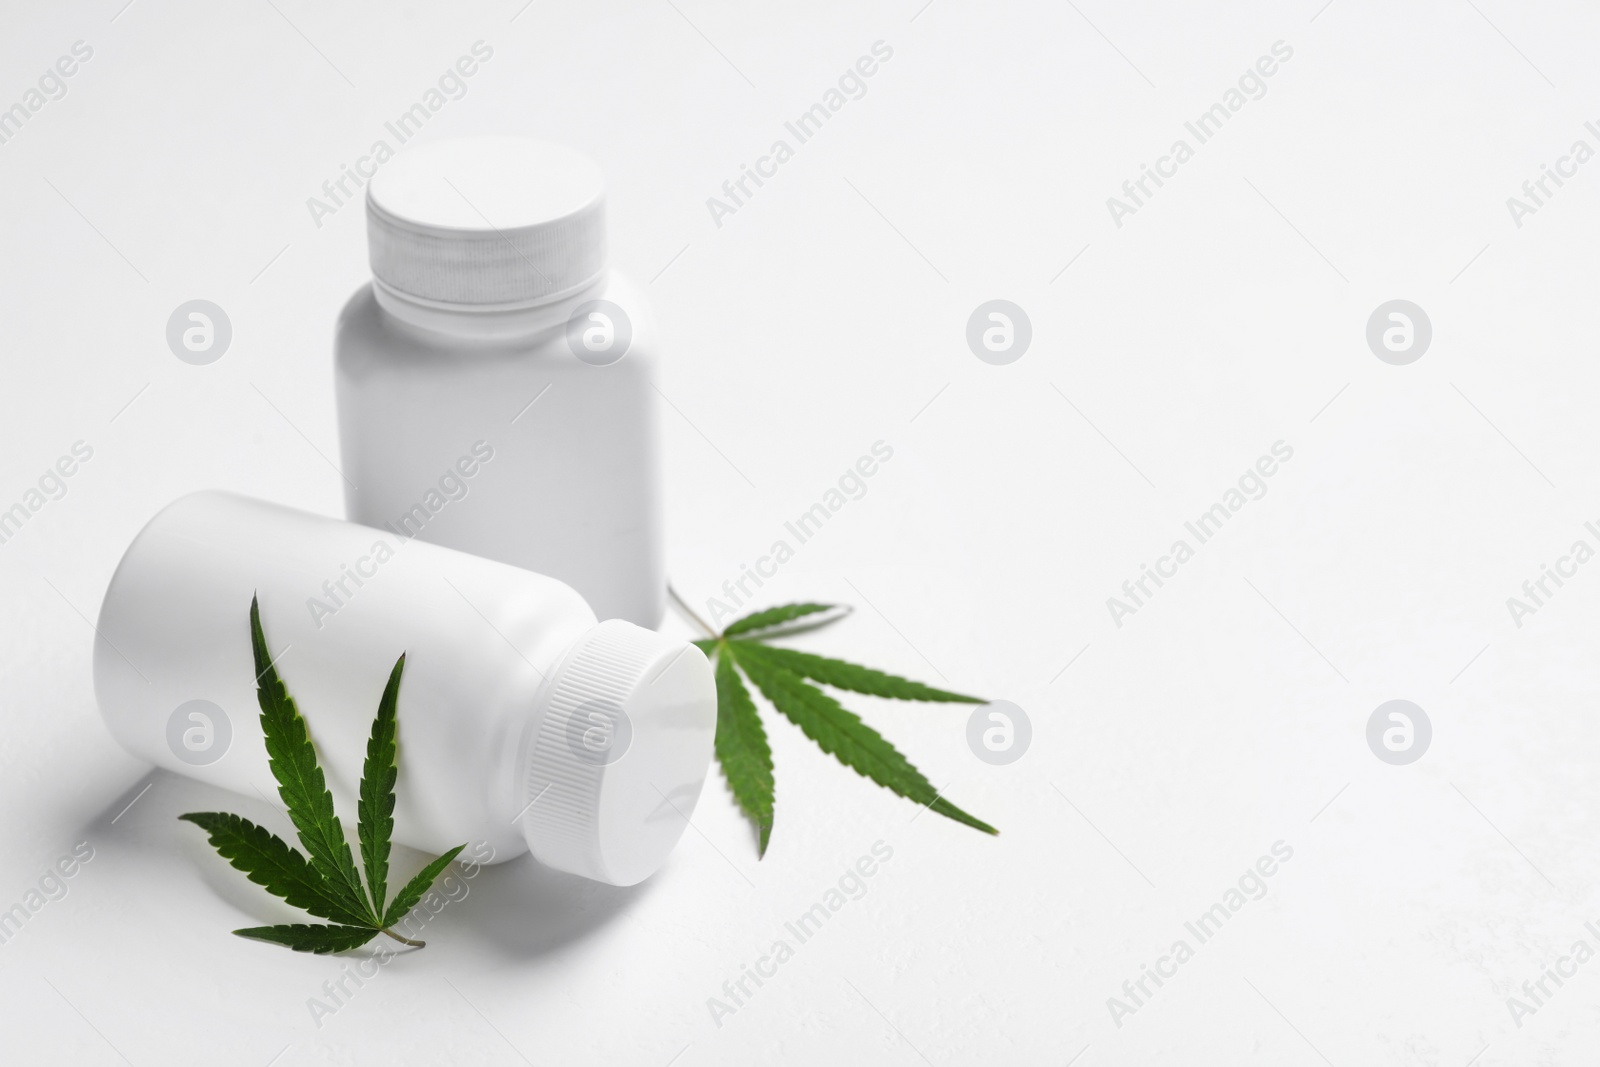 Photo of Hemp leaves and pill bottles on white background. Space for text